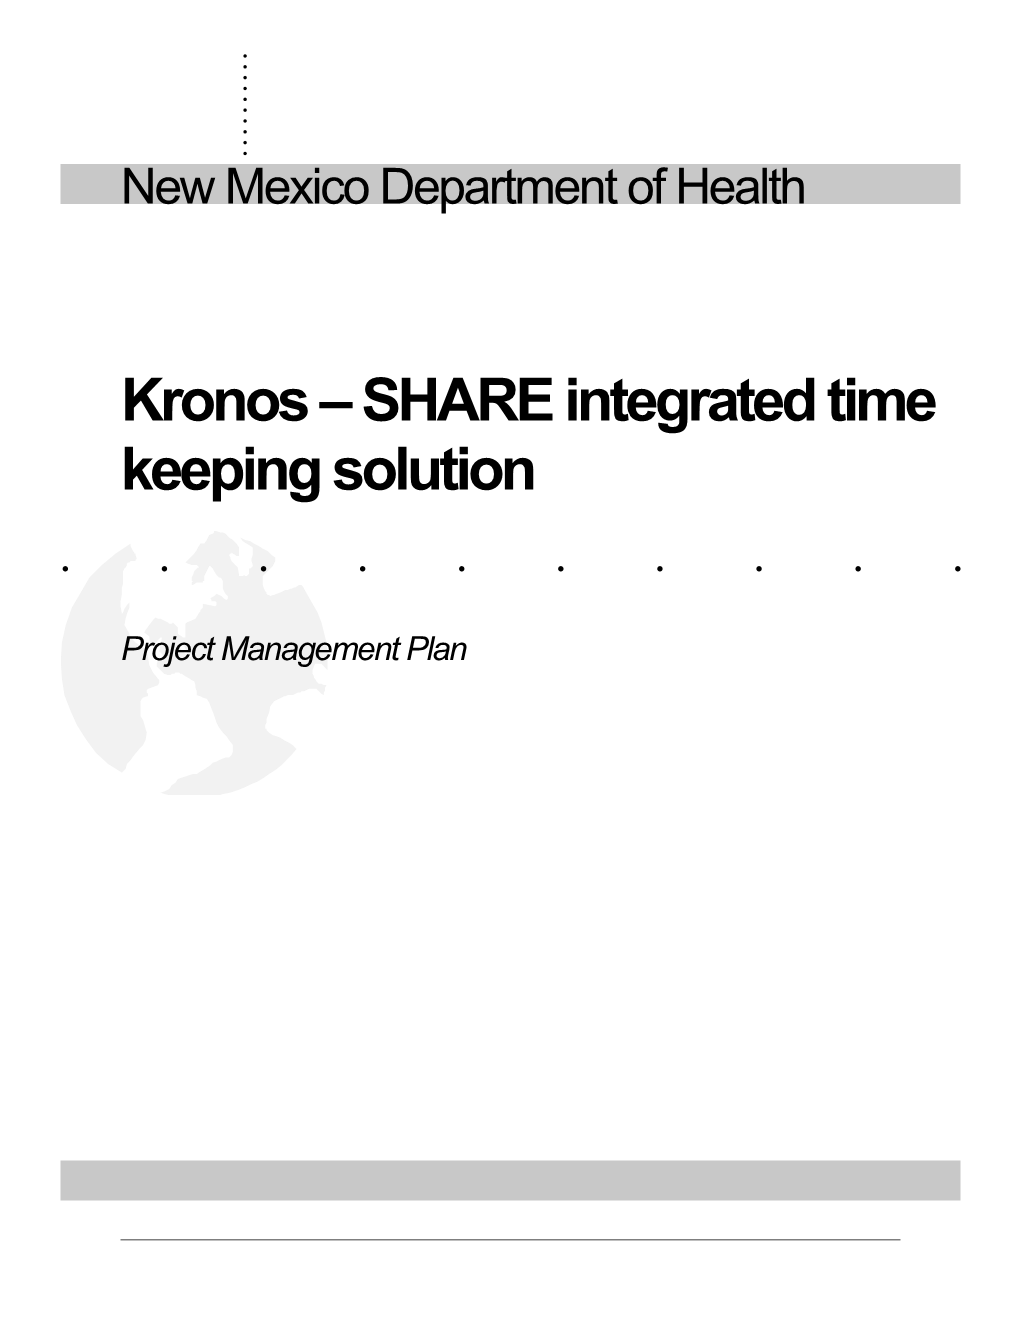 Kronos SHARE Integrated Time Keeping Solution